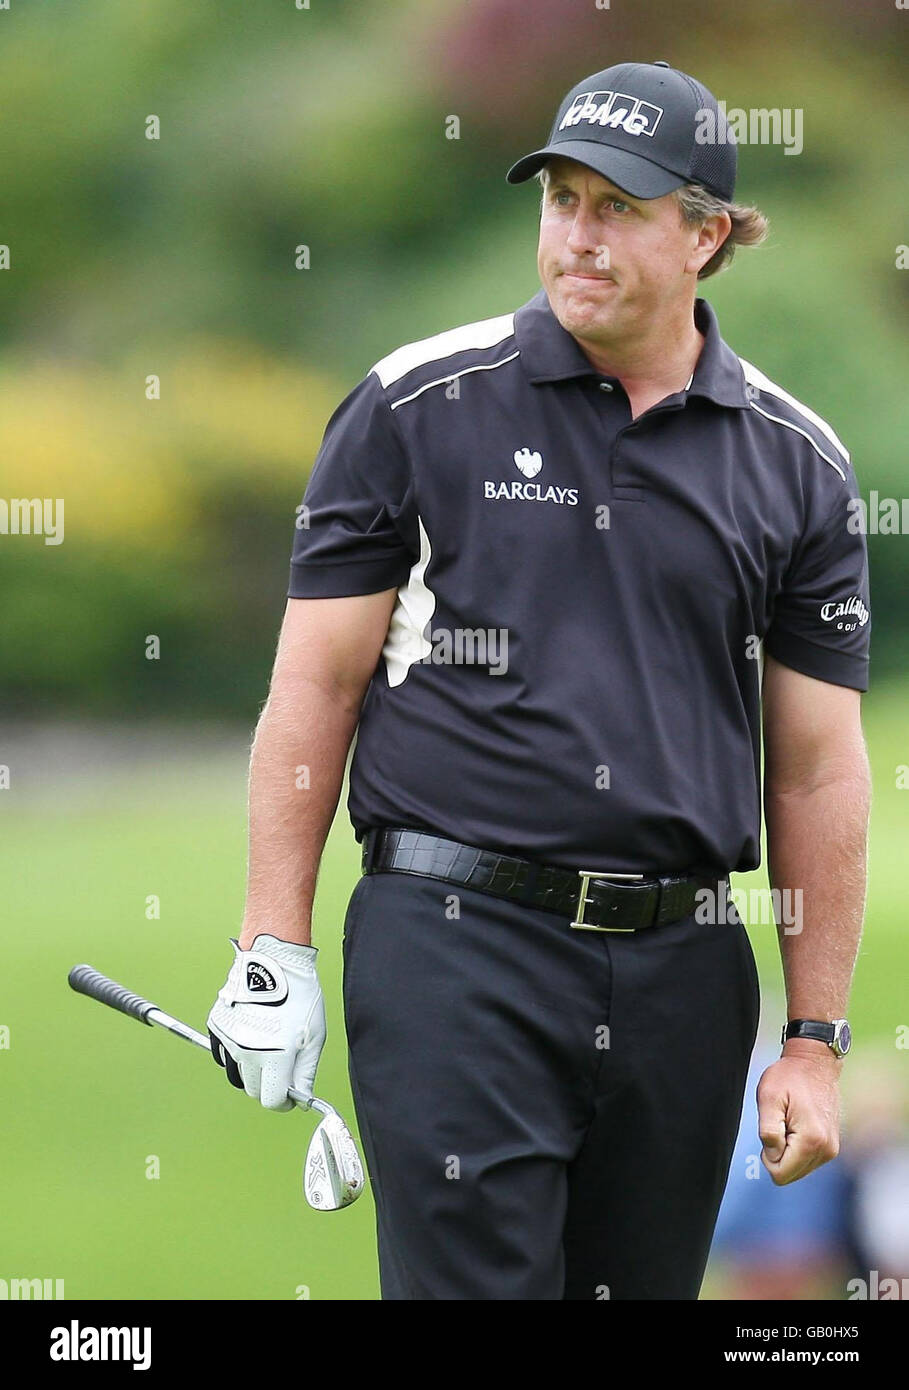 Golf - The Barclays Scottish Open - Second Round - Loch Lomond. Phil Mickelson on the 9th during The Barclays Scottish Open at Loch Lomond, Glasgow. Stock Photo